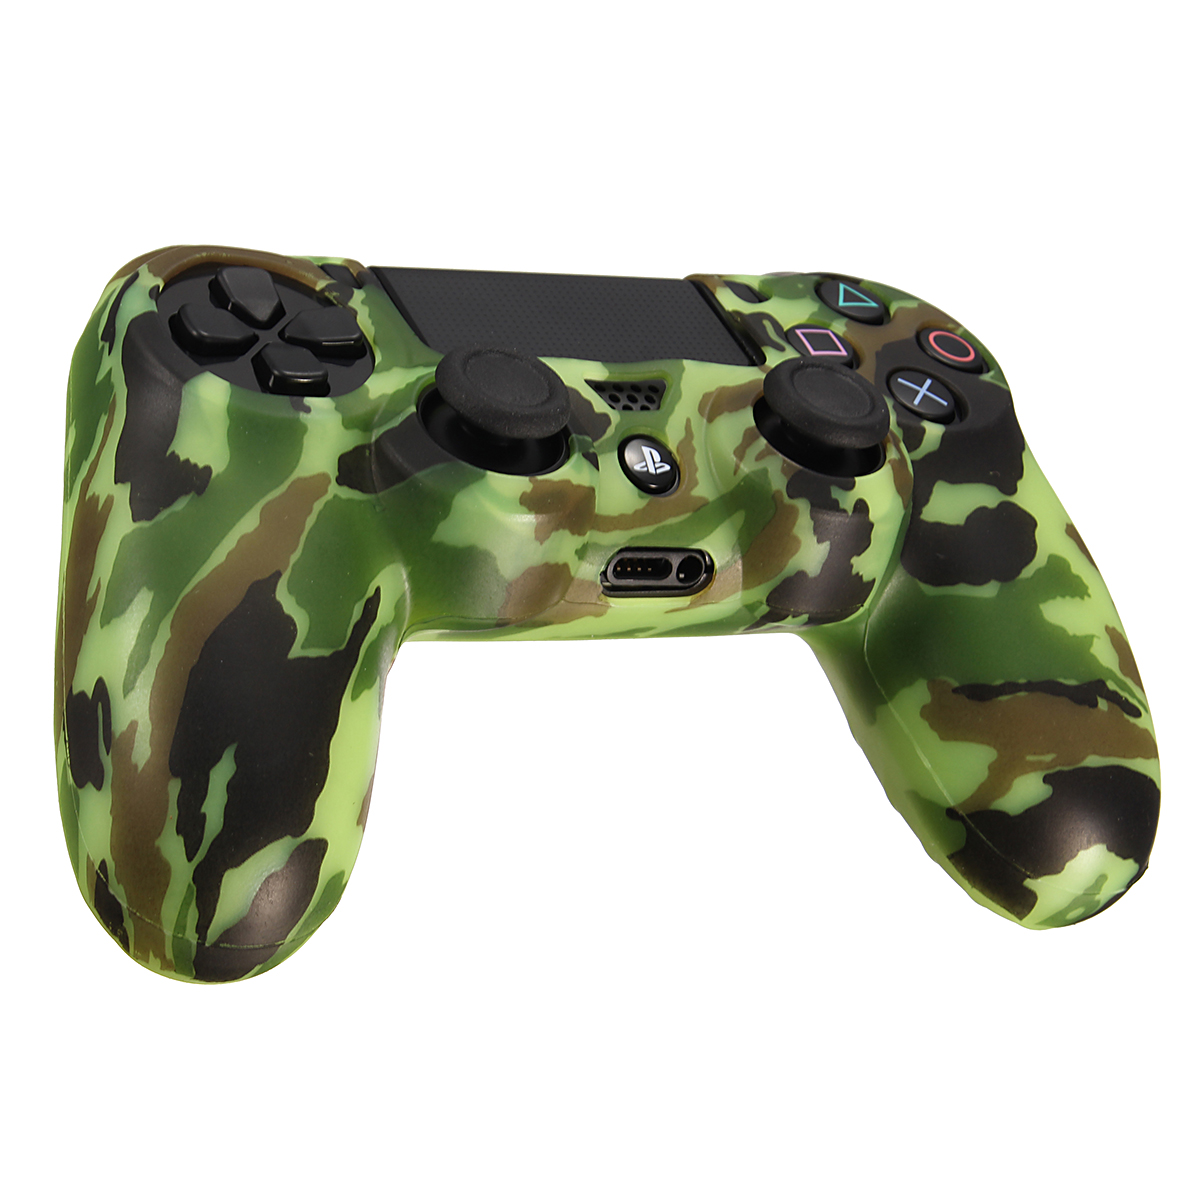 Durable Decal Camouflage Grip Cover Case Silicone Rubber Soft Skin Protector for Playstation 4 for Dualshock 4 Gamepad 19